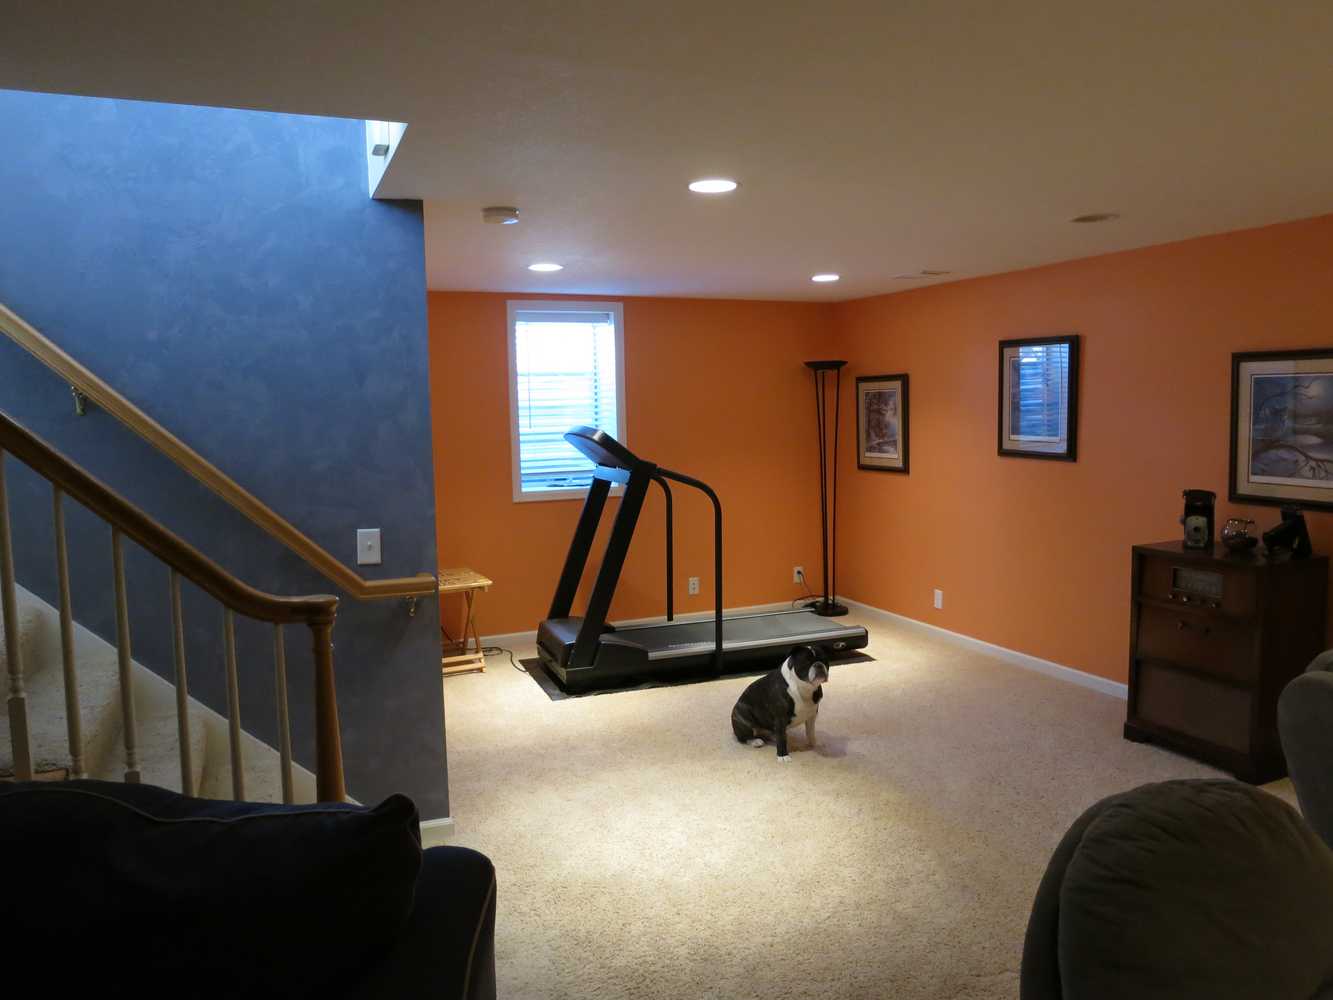 House Remodeling | Basement Remodeling | Minneapolis | Wuensch Construction